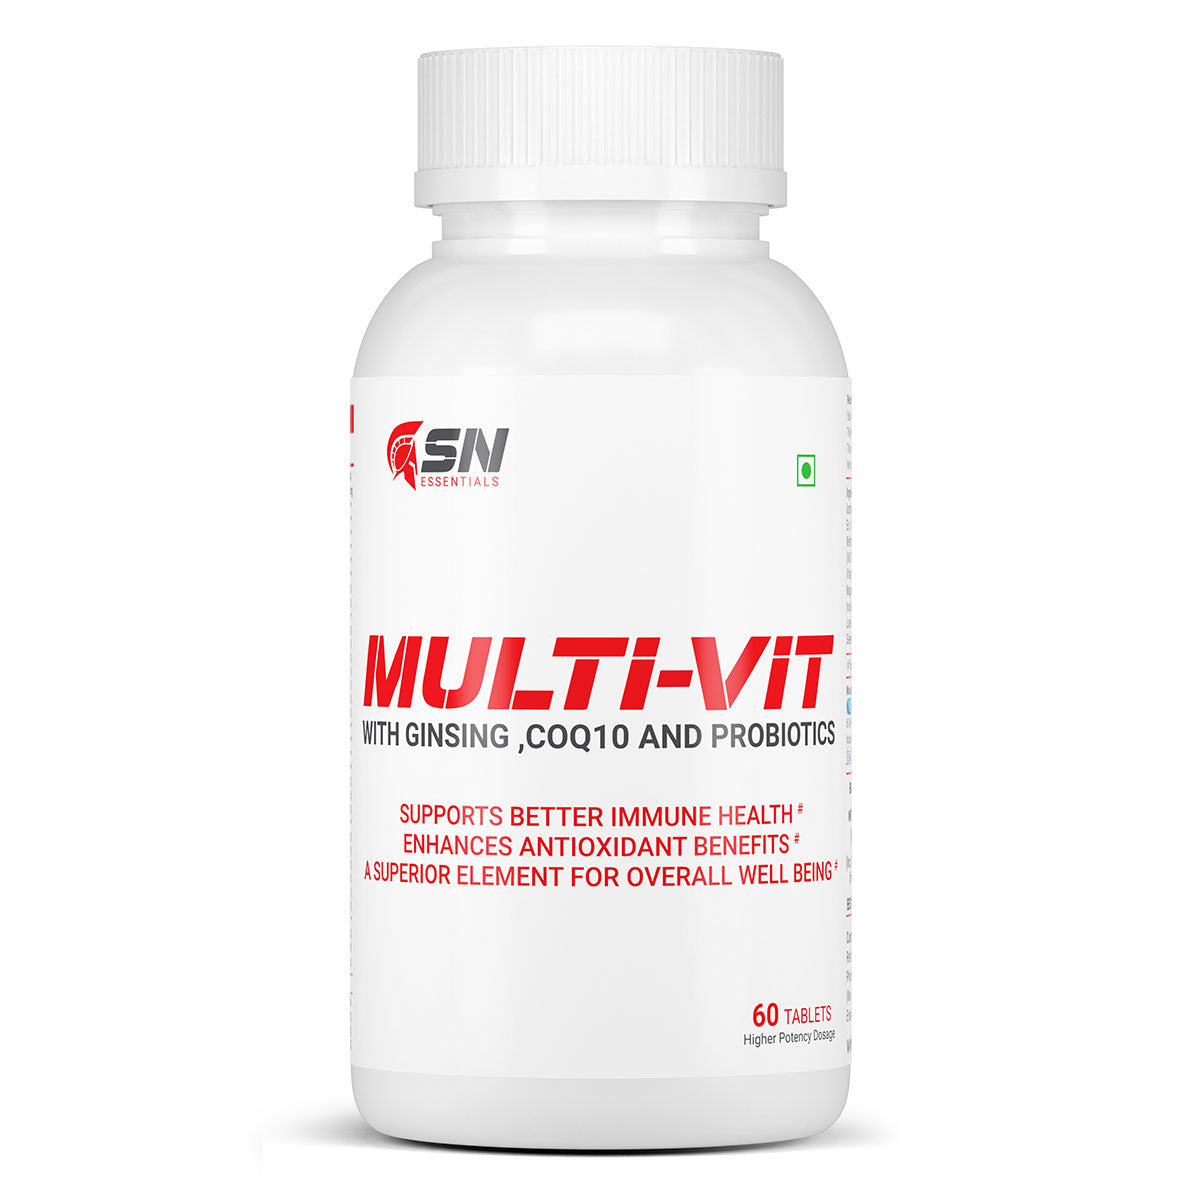 Spartan Essentials Multi-Vitamin With GINSING, COQ10, And Probiotics (Supports immune)